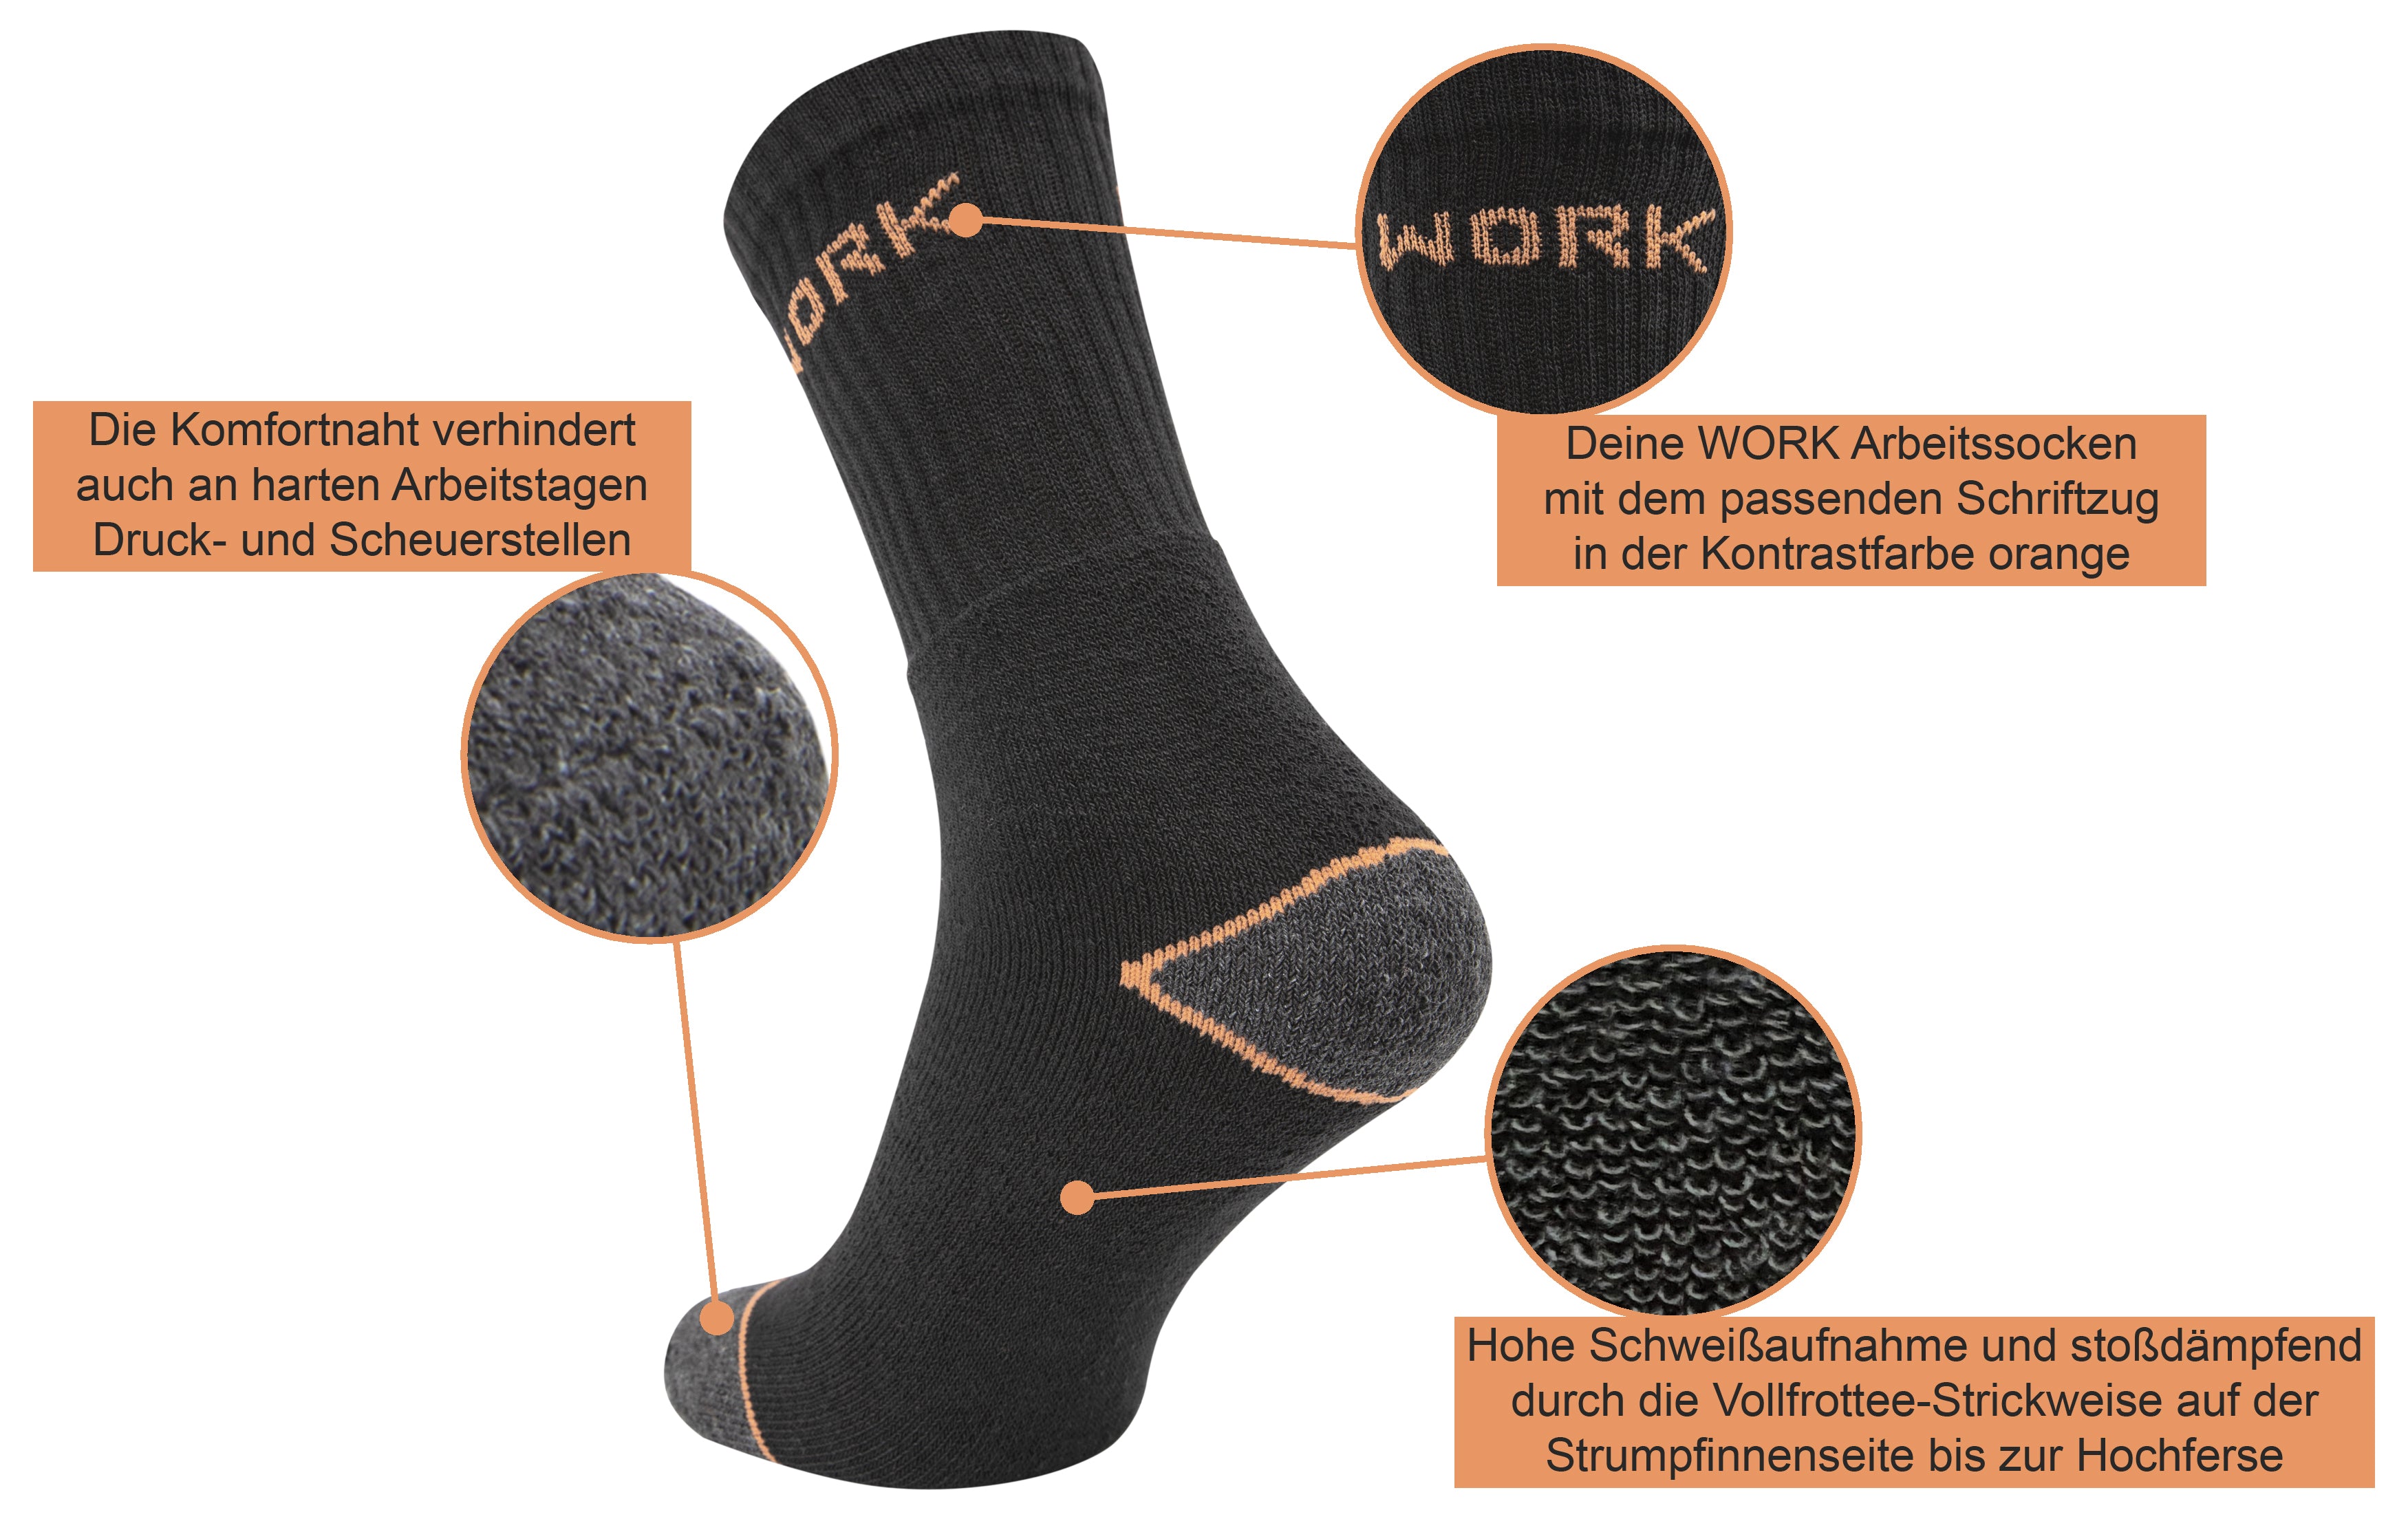 - Renzo® 36 and 39/42 sizes Paolo 43/46 or pairs 3/6/12/18 – work Traumpreisfabrik socks